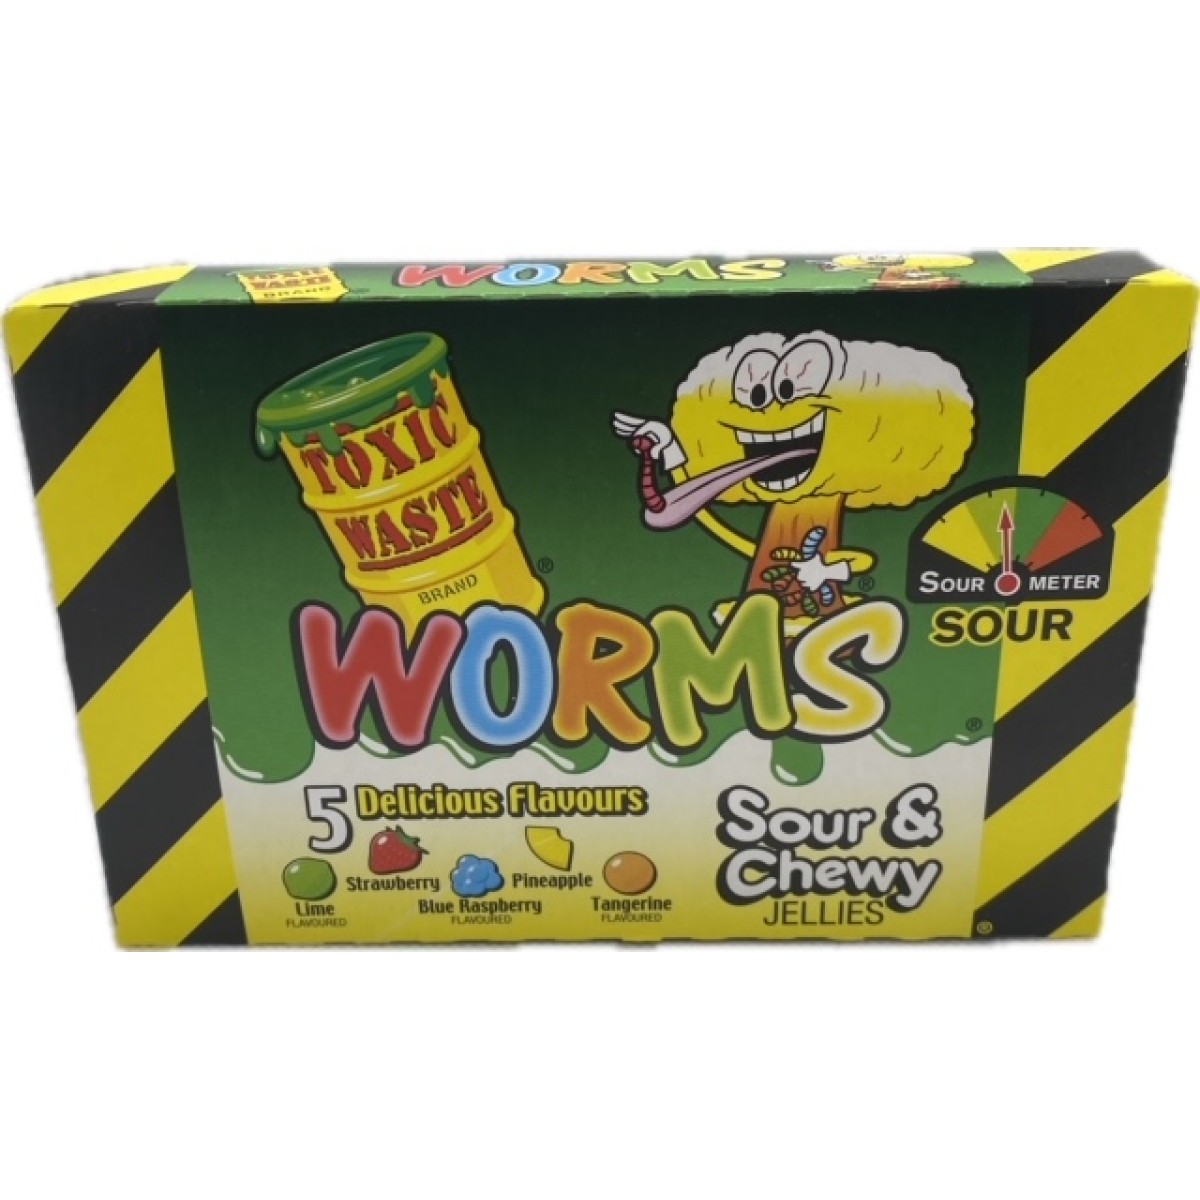 Toxic waste worms box